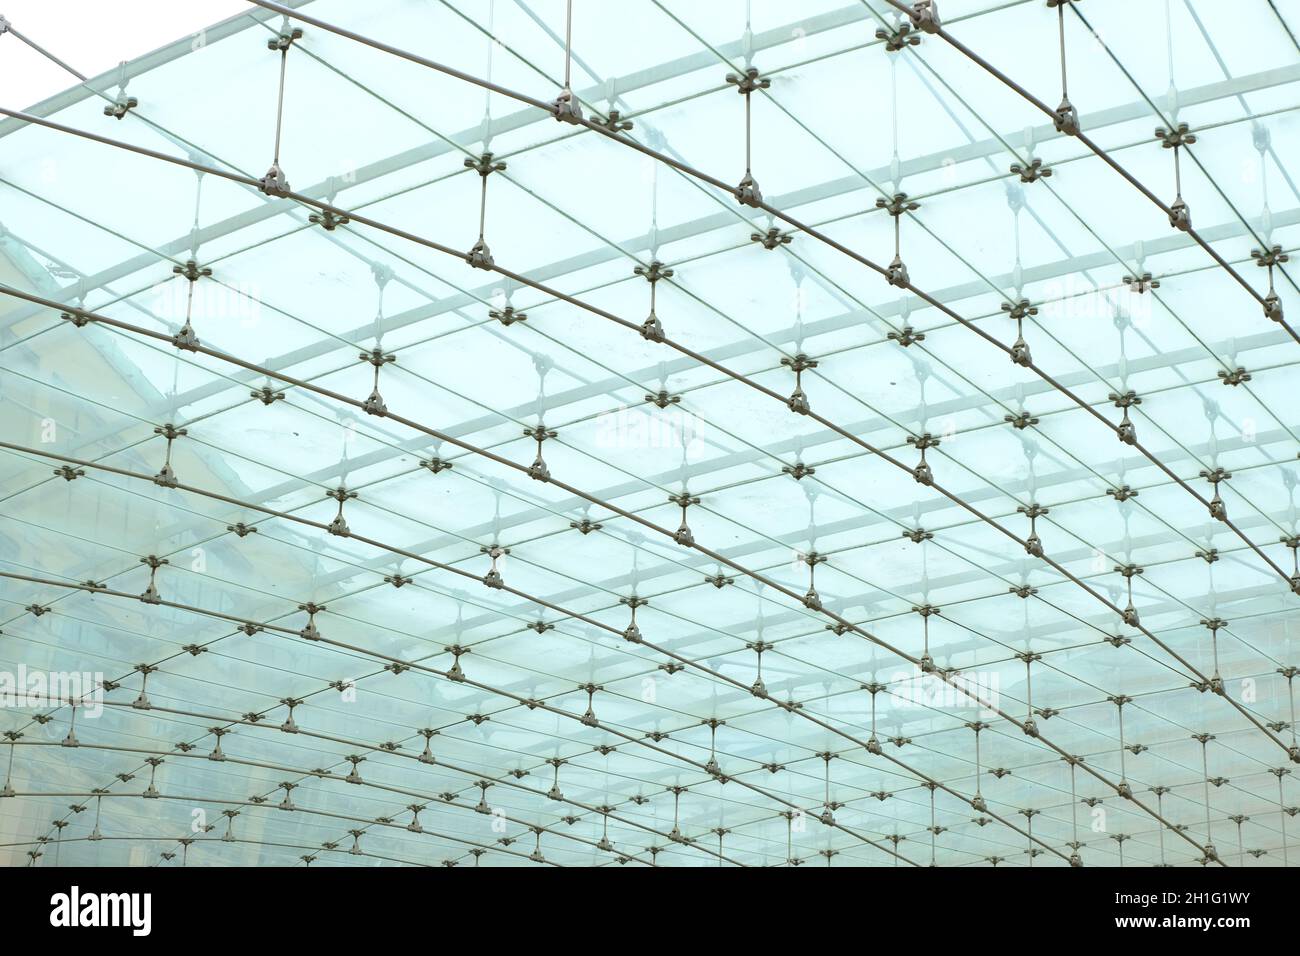 Glass roof of modern square. Glass plates supported by stainless steel cables and struts.   Lodi, Lombardy, Italy. Stock Photo